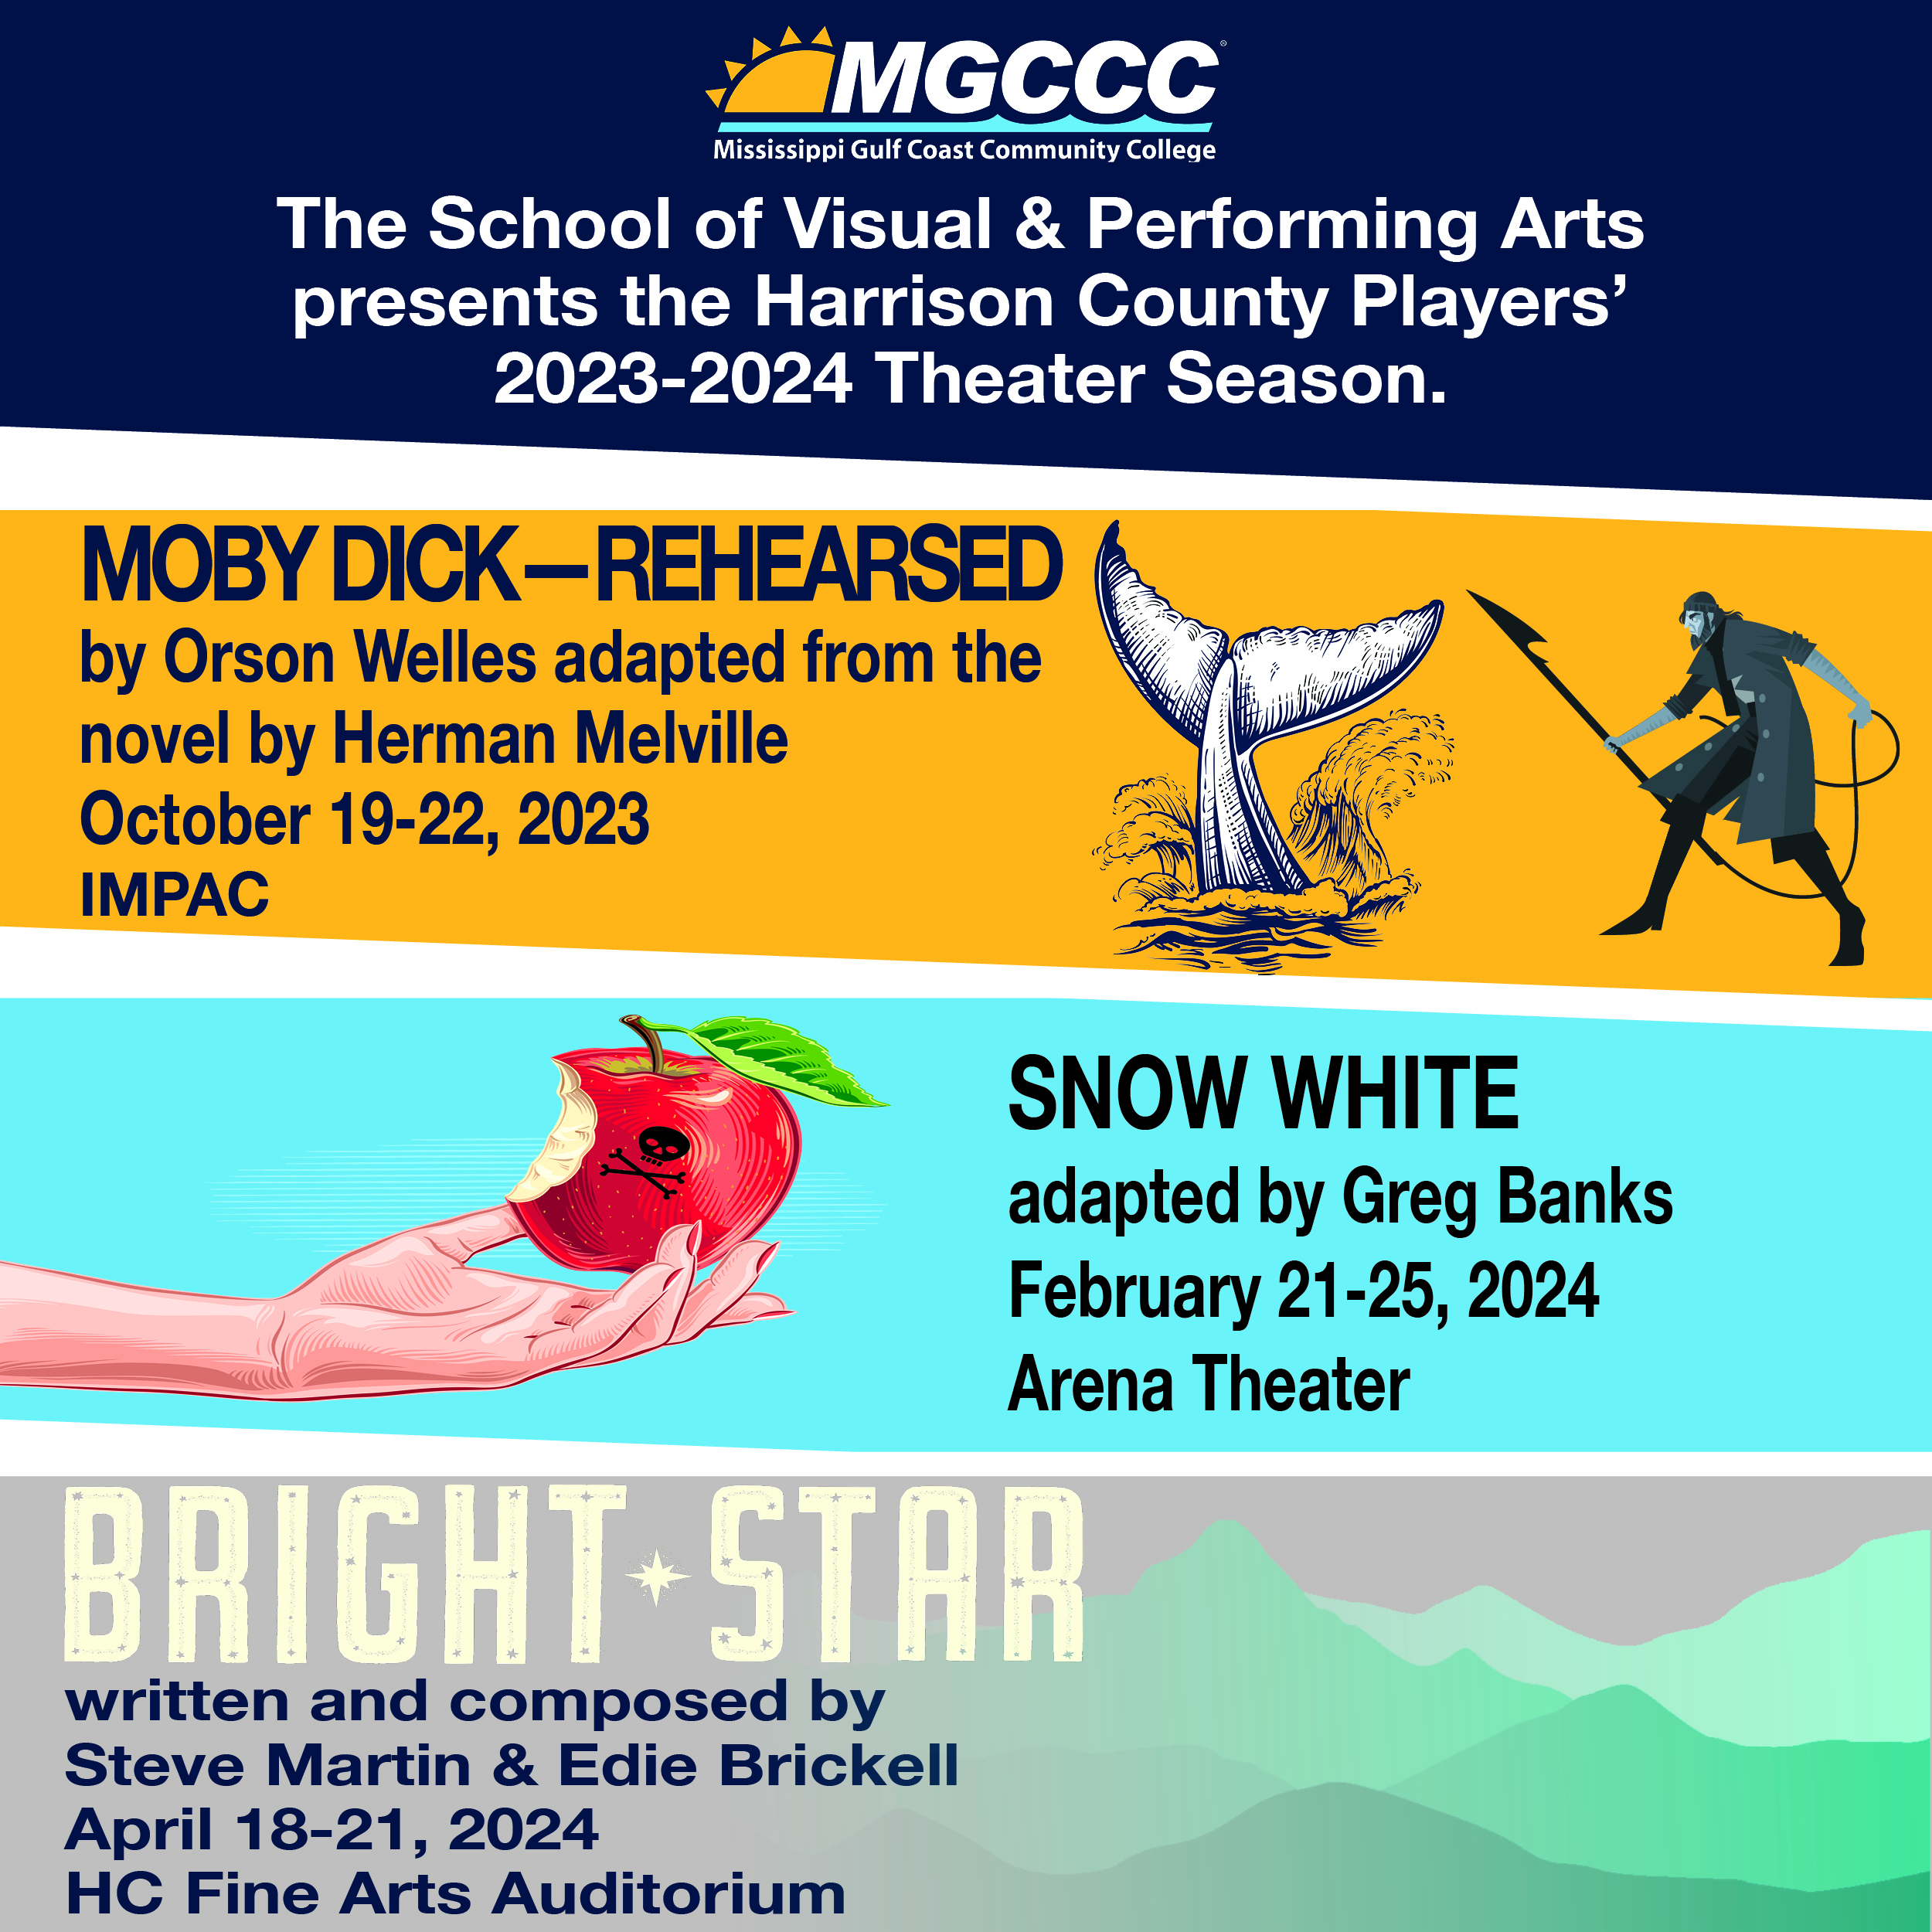 MGCCC Harrison County Campus Theater Players announce their 2023-2024 season